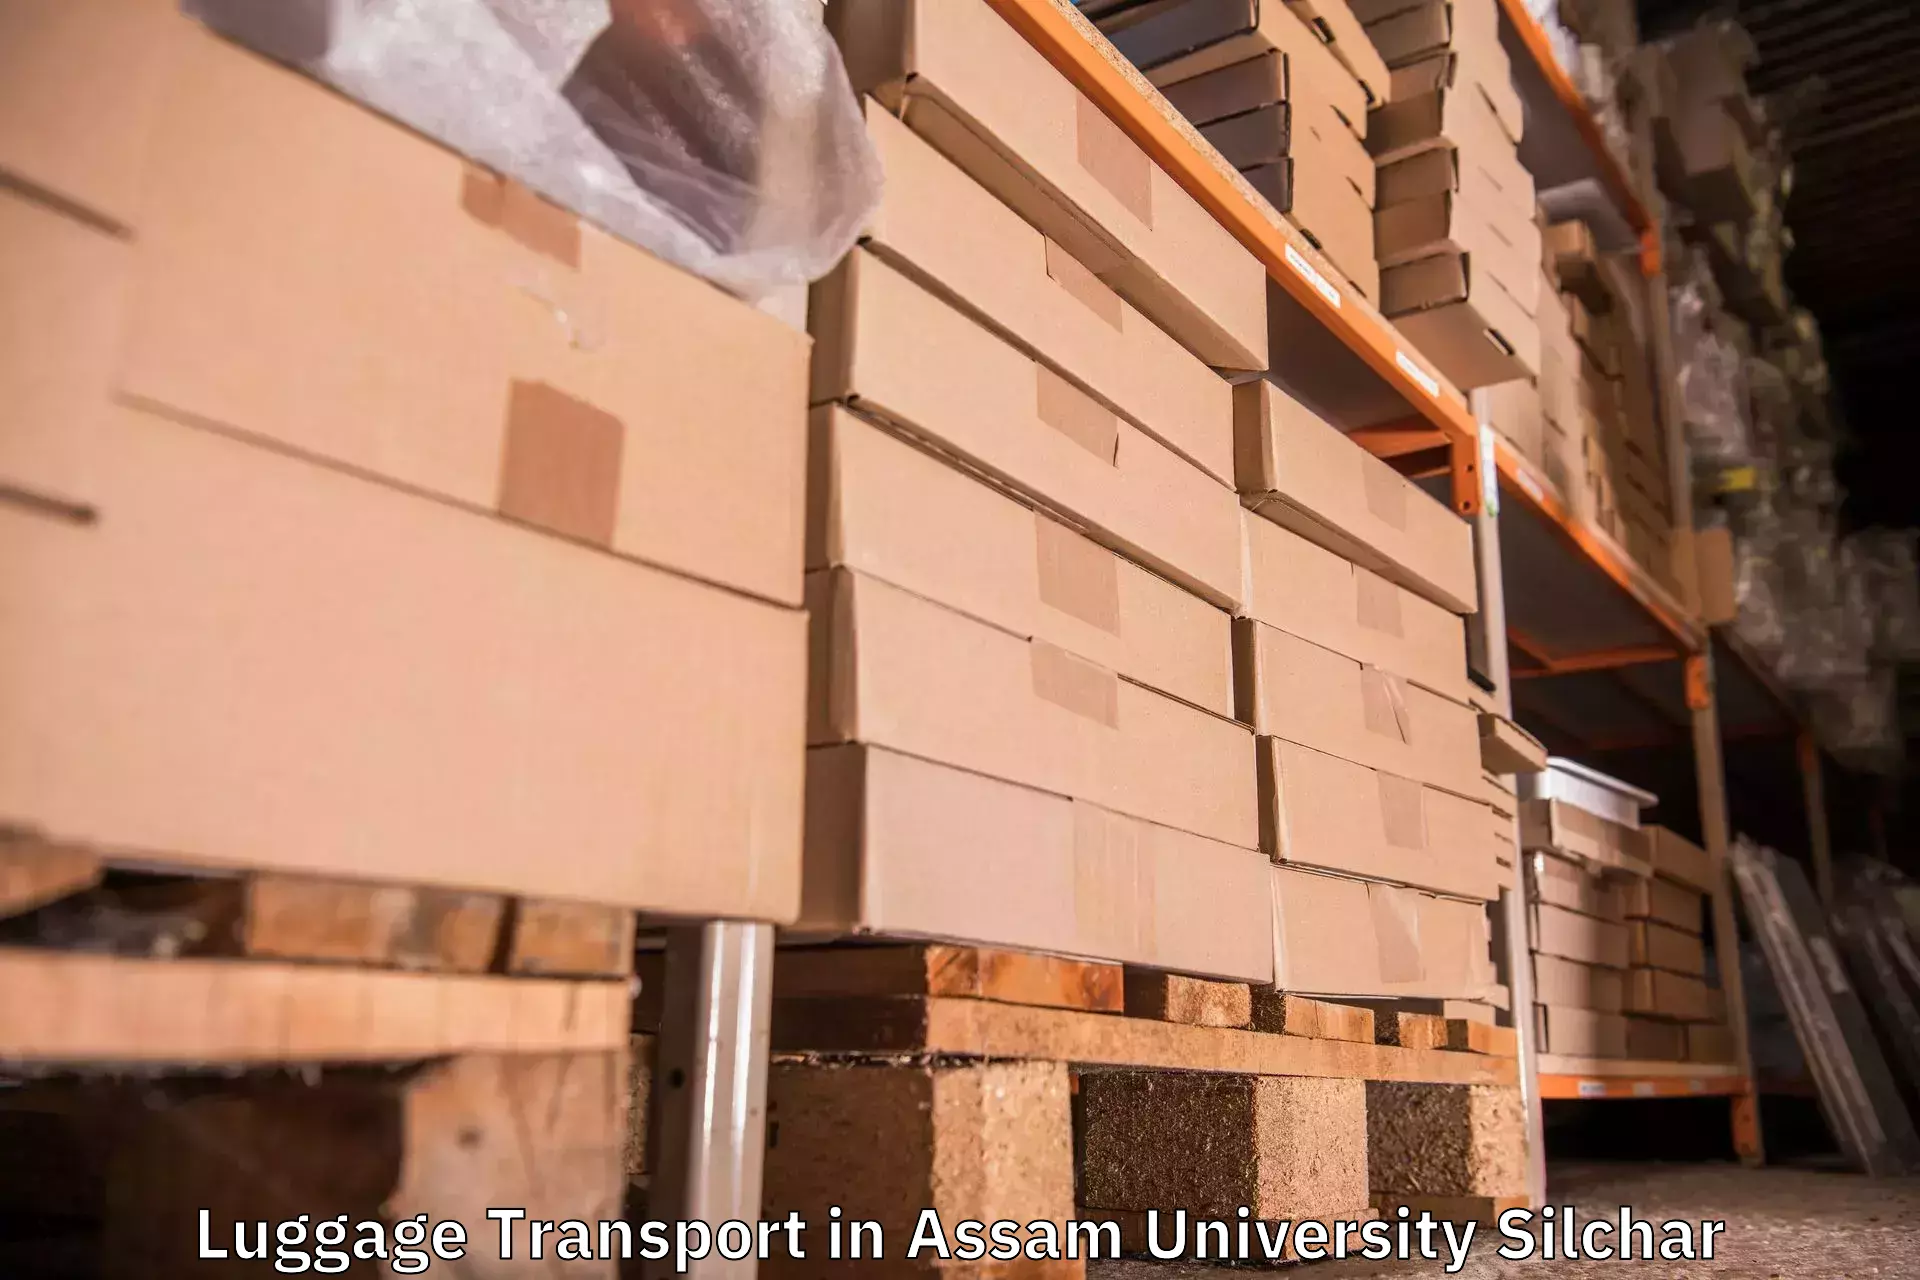 Luggage shipping planner in Assam University Silchar